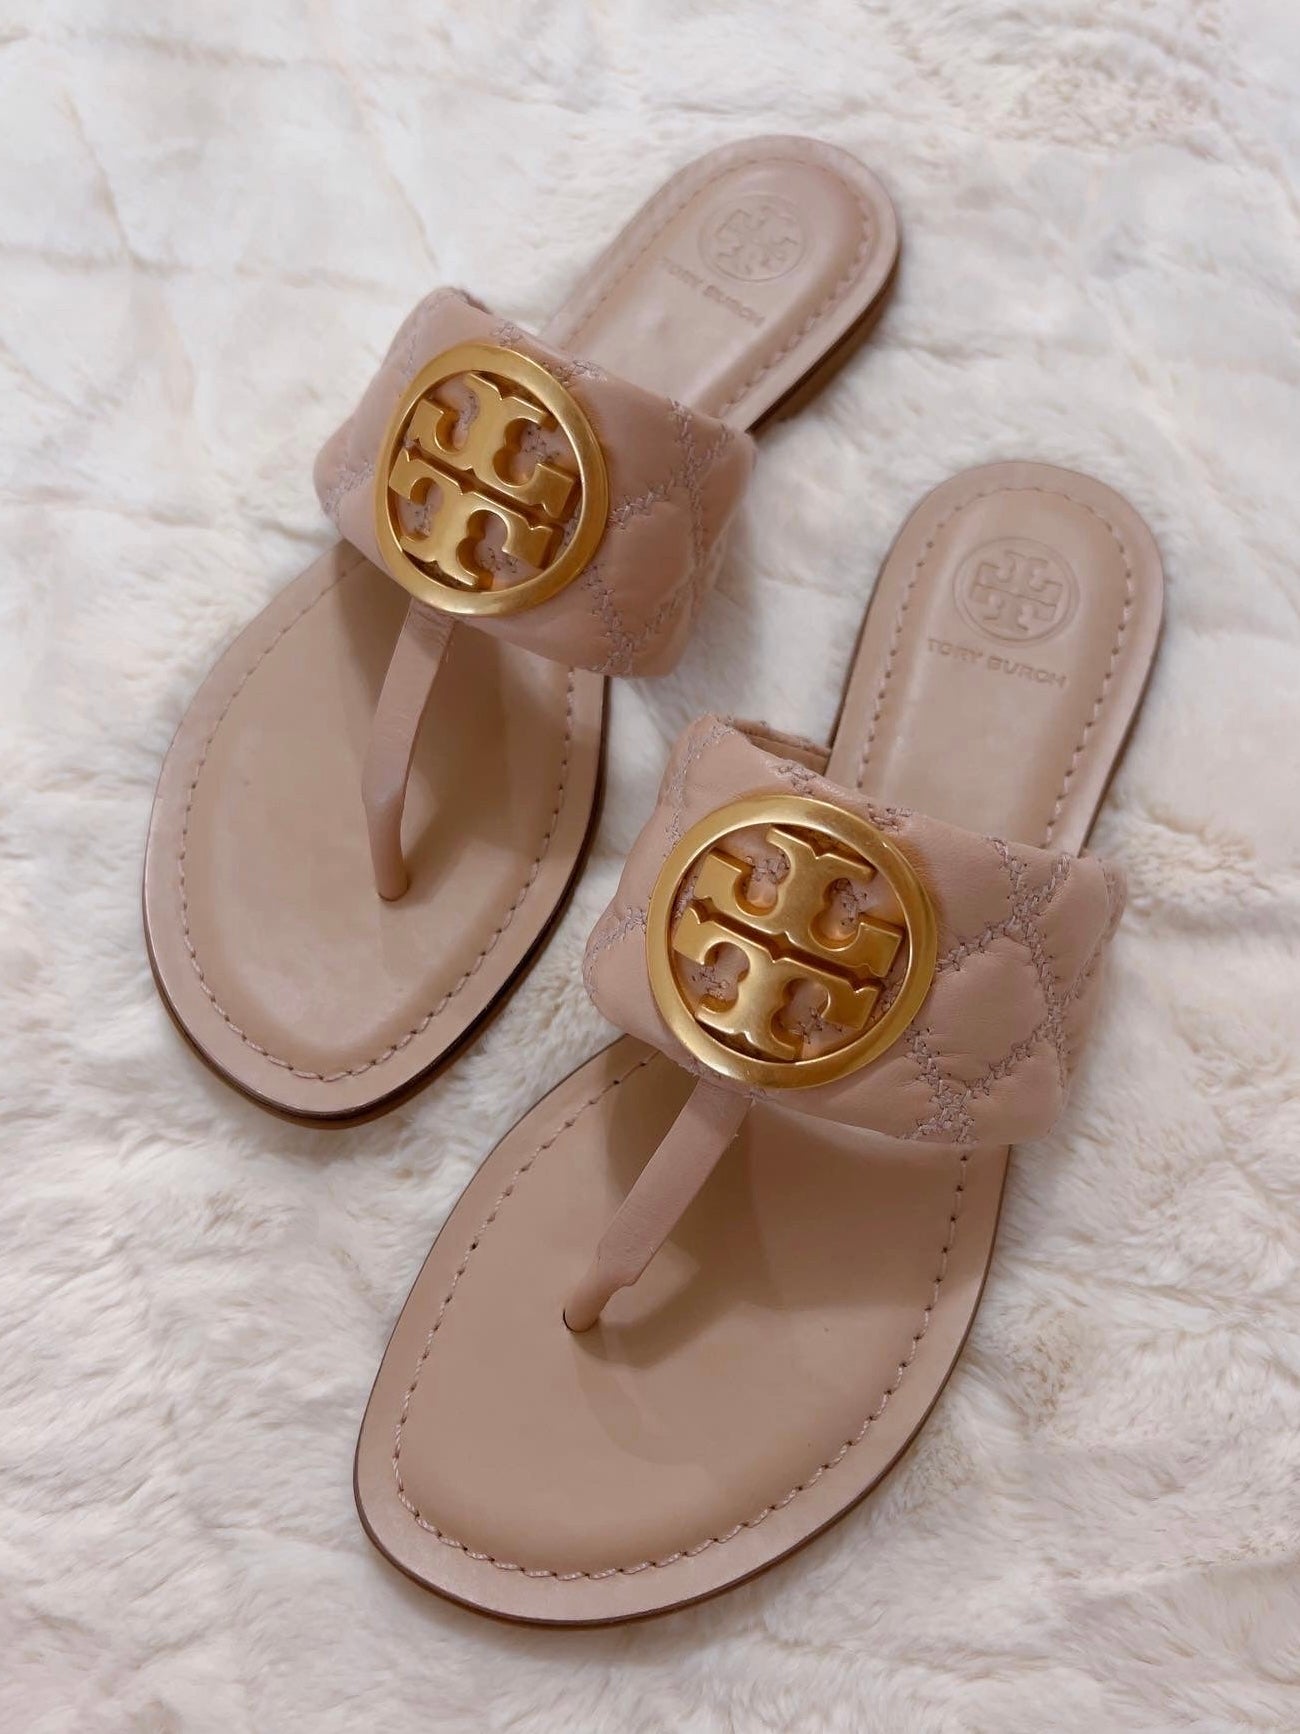 Tory Burch Benton Band Flat Sandal Quilted Nappa Leather, Goan Sand / Rolled, 7 & 8